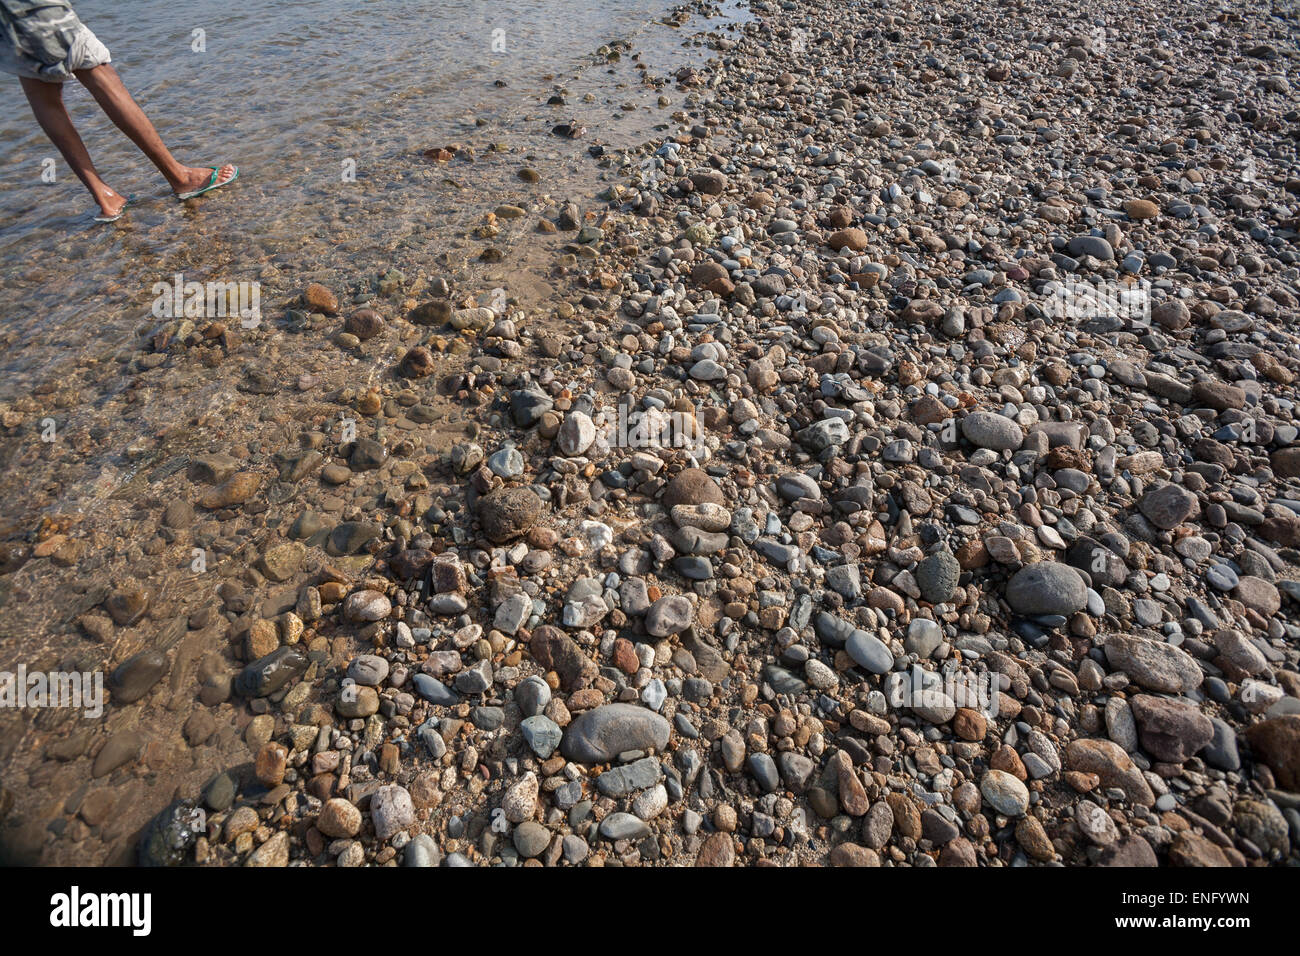 A man standing on a riverbed near Lubuk Sikaping, Pasaman, West Sumatra, Indonesia. Stock Photo